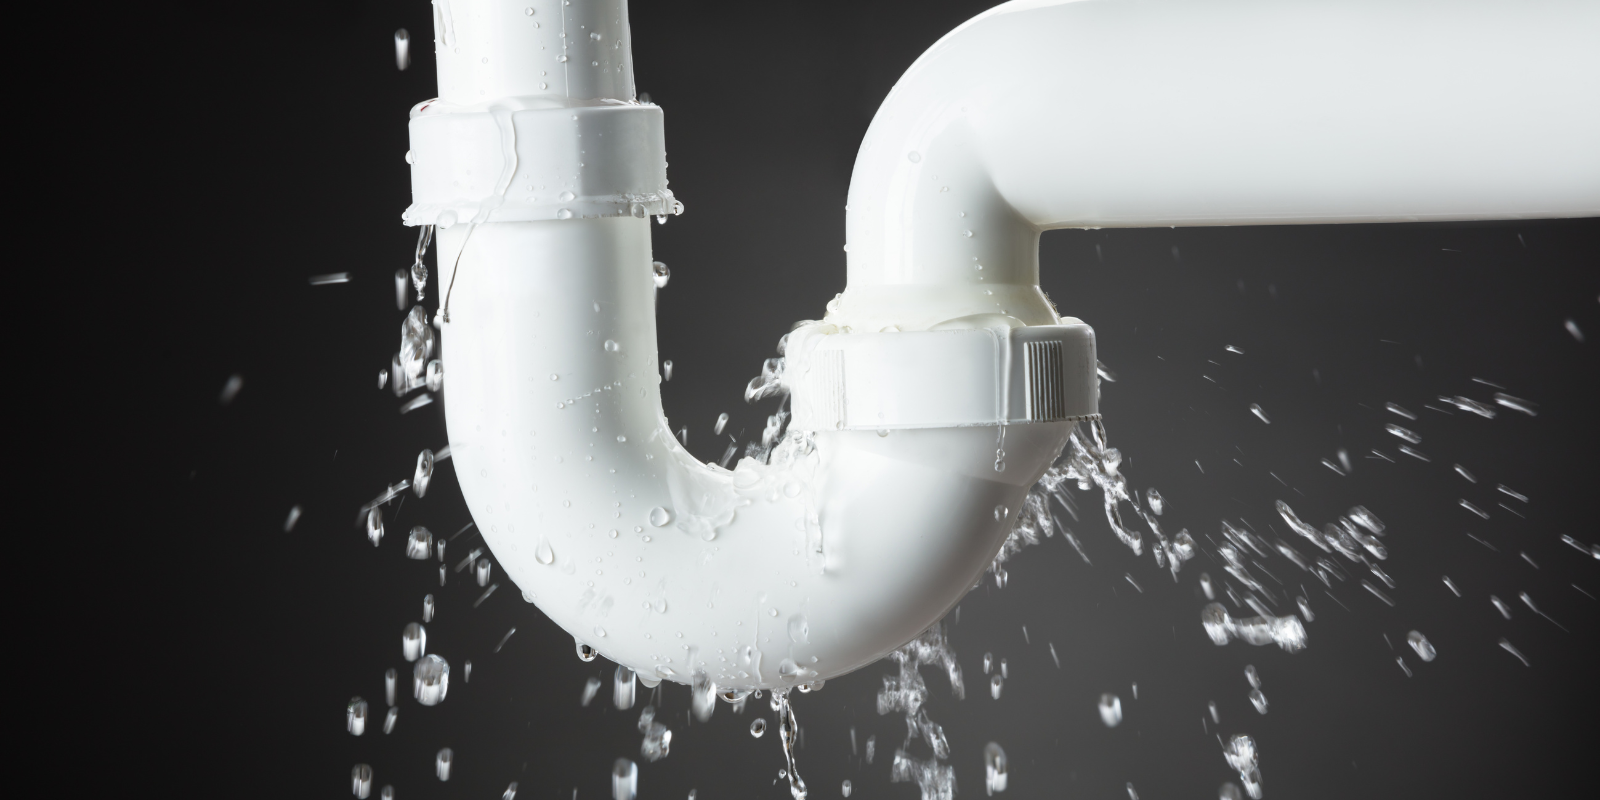 What To Do When A Pipe Bursts In Your Building? Our Experts Have Answers